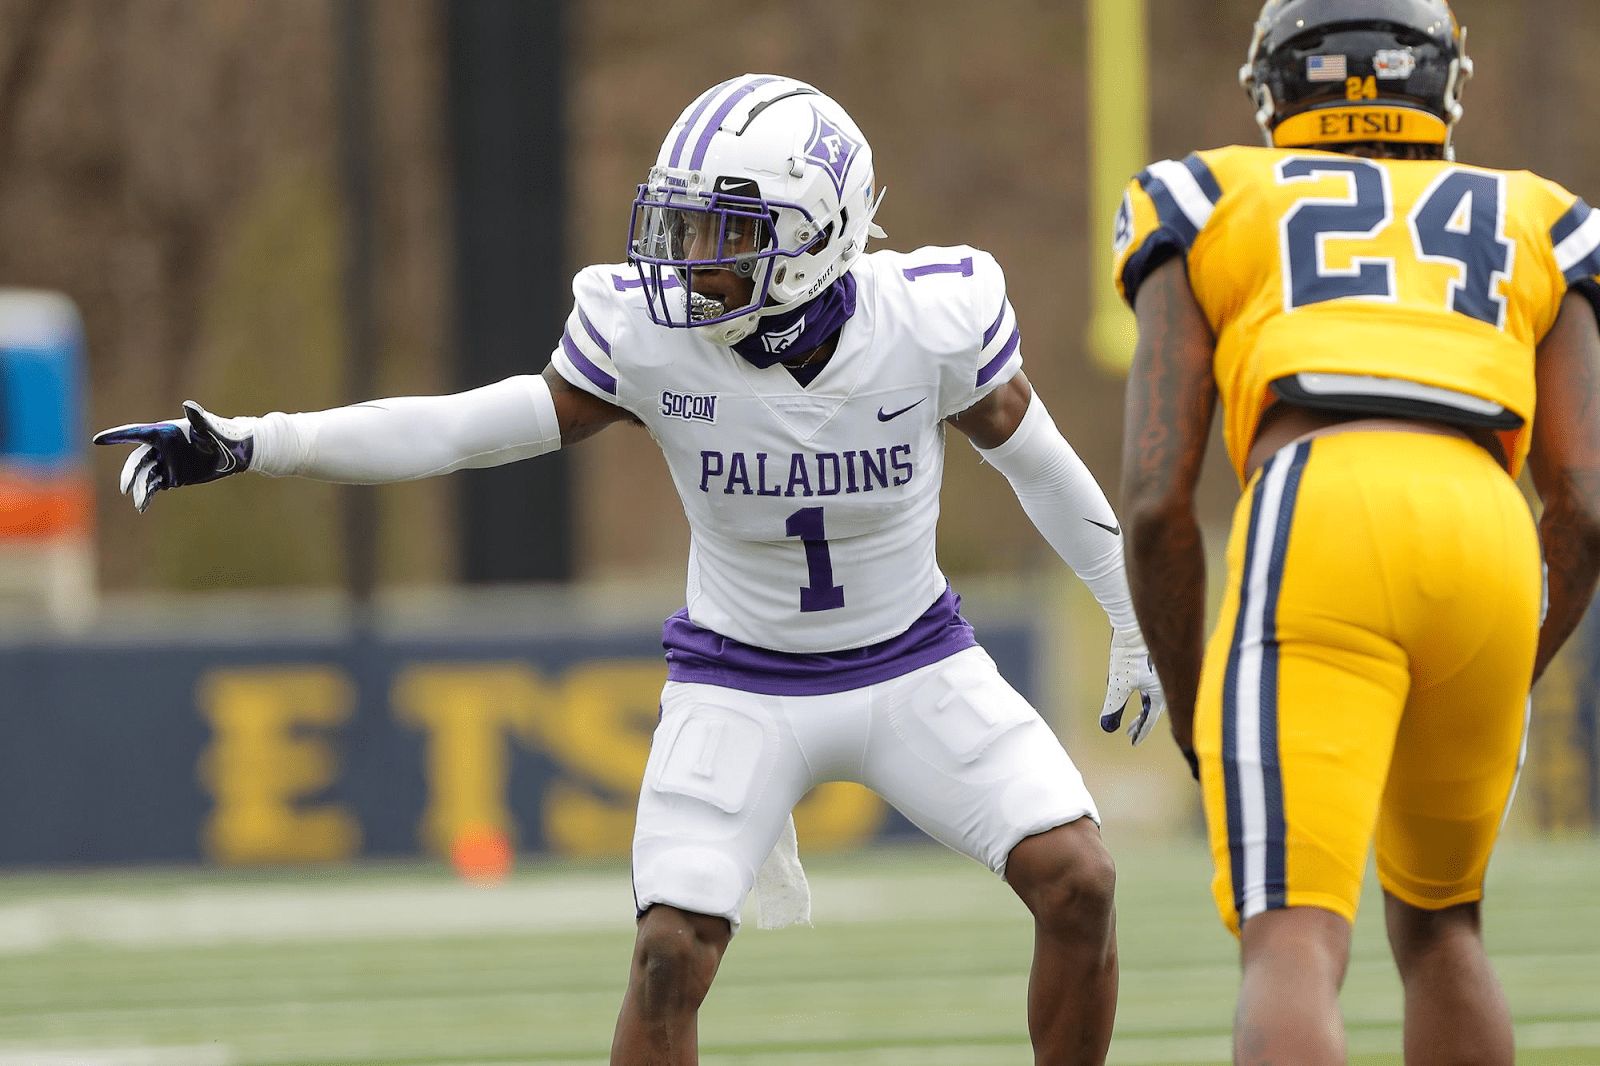 Travis Blackshear is a standout defensive back out of Furman University. He recently sat down with NFL Draft Diamonds writer Jimmy Williams.